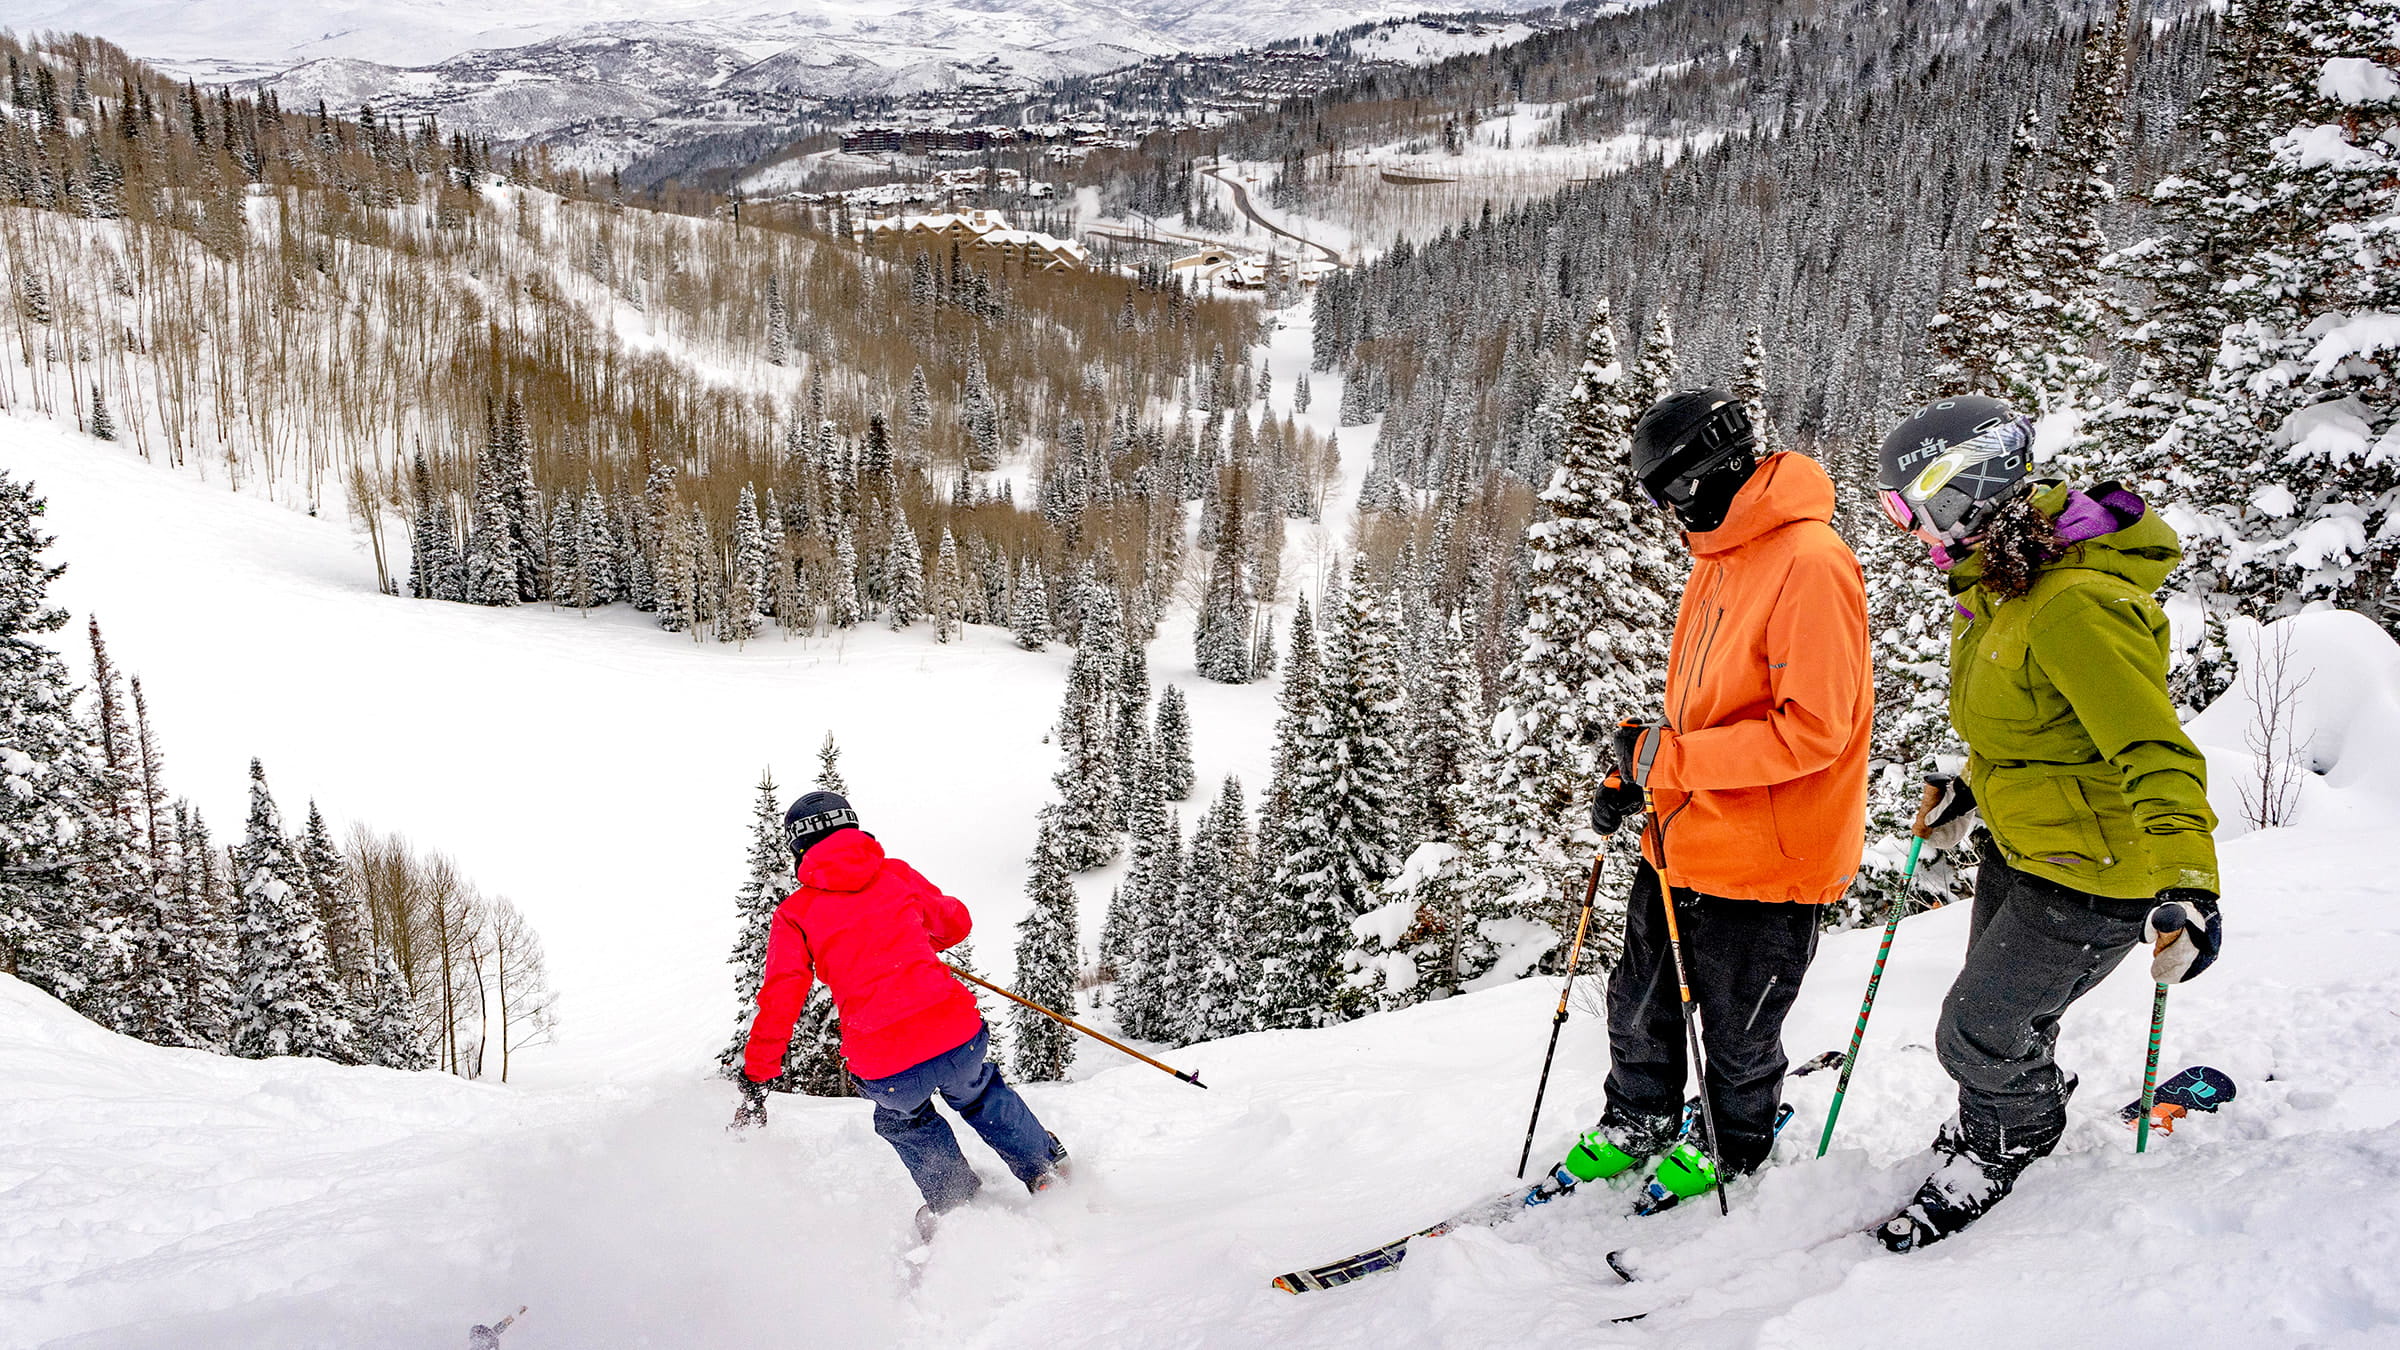 Three friends skiing together at Deer Valley.